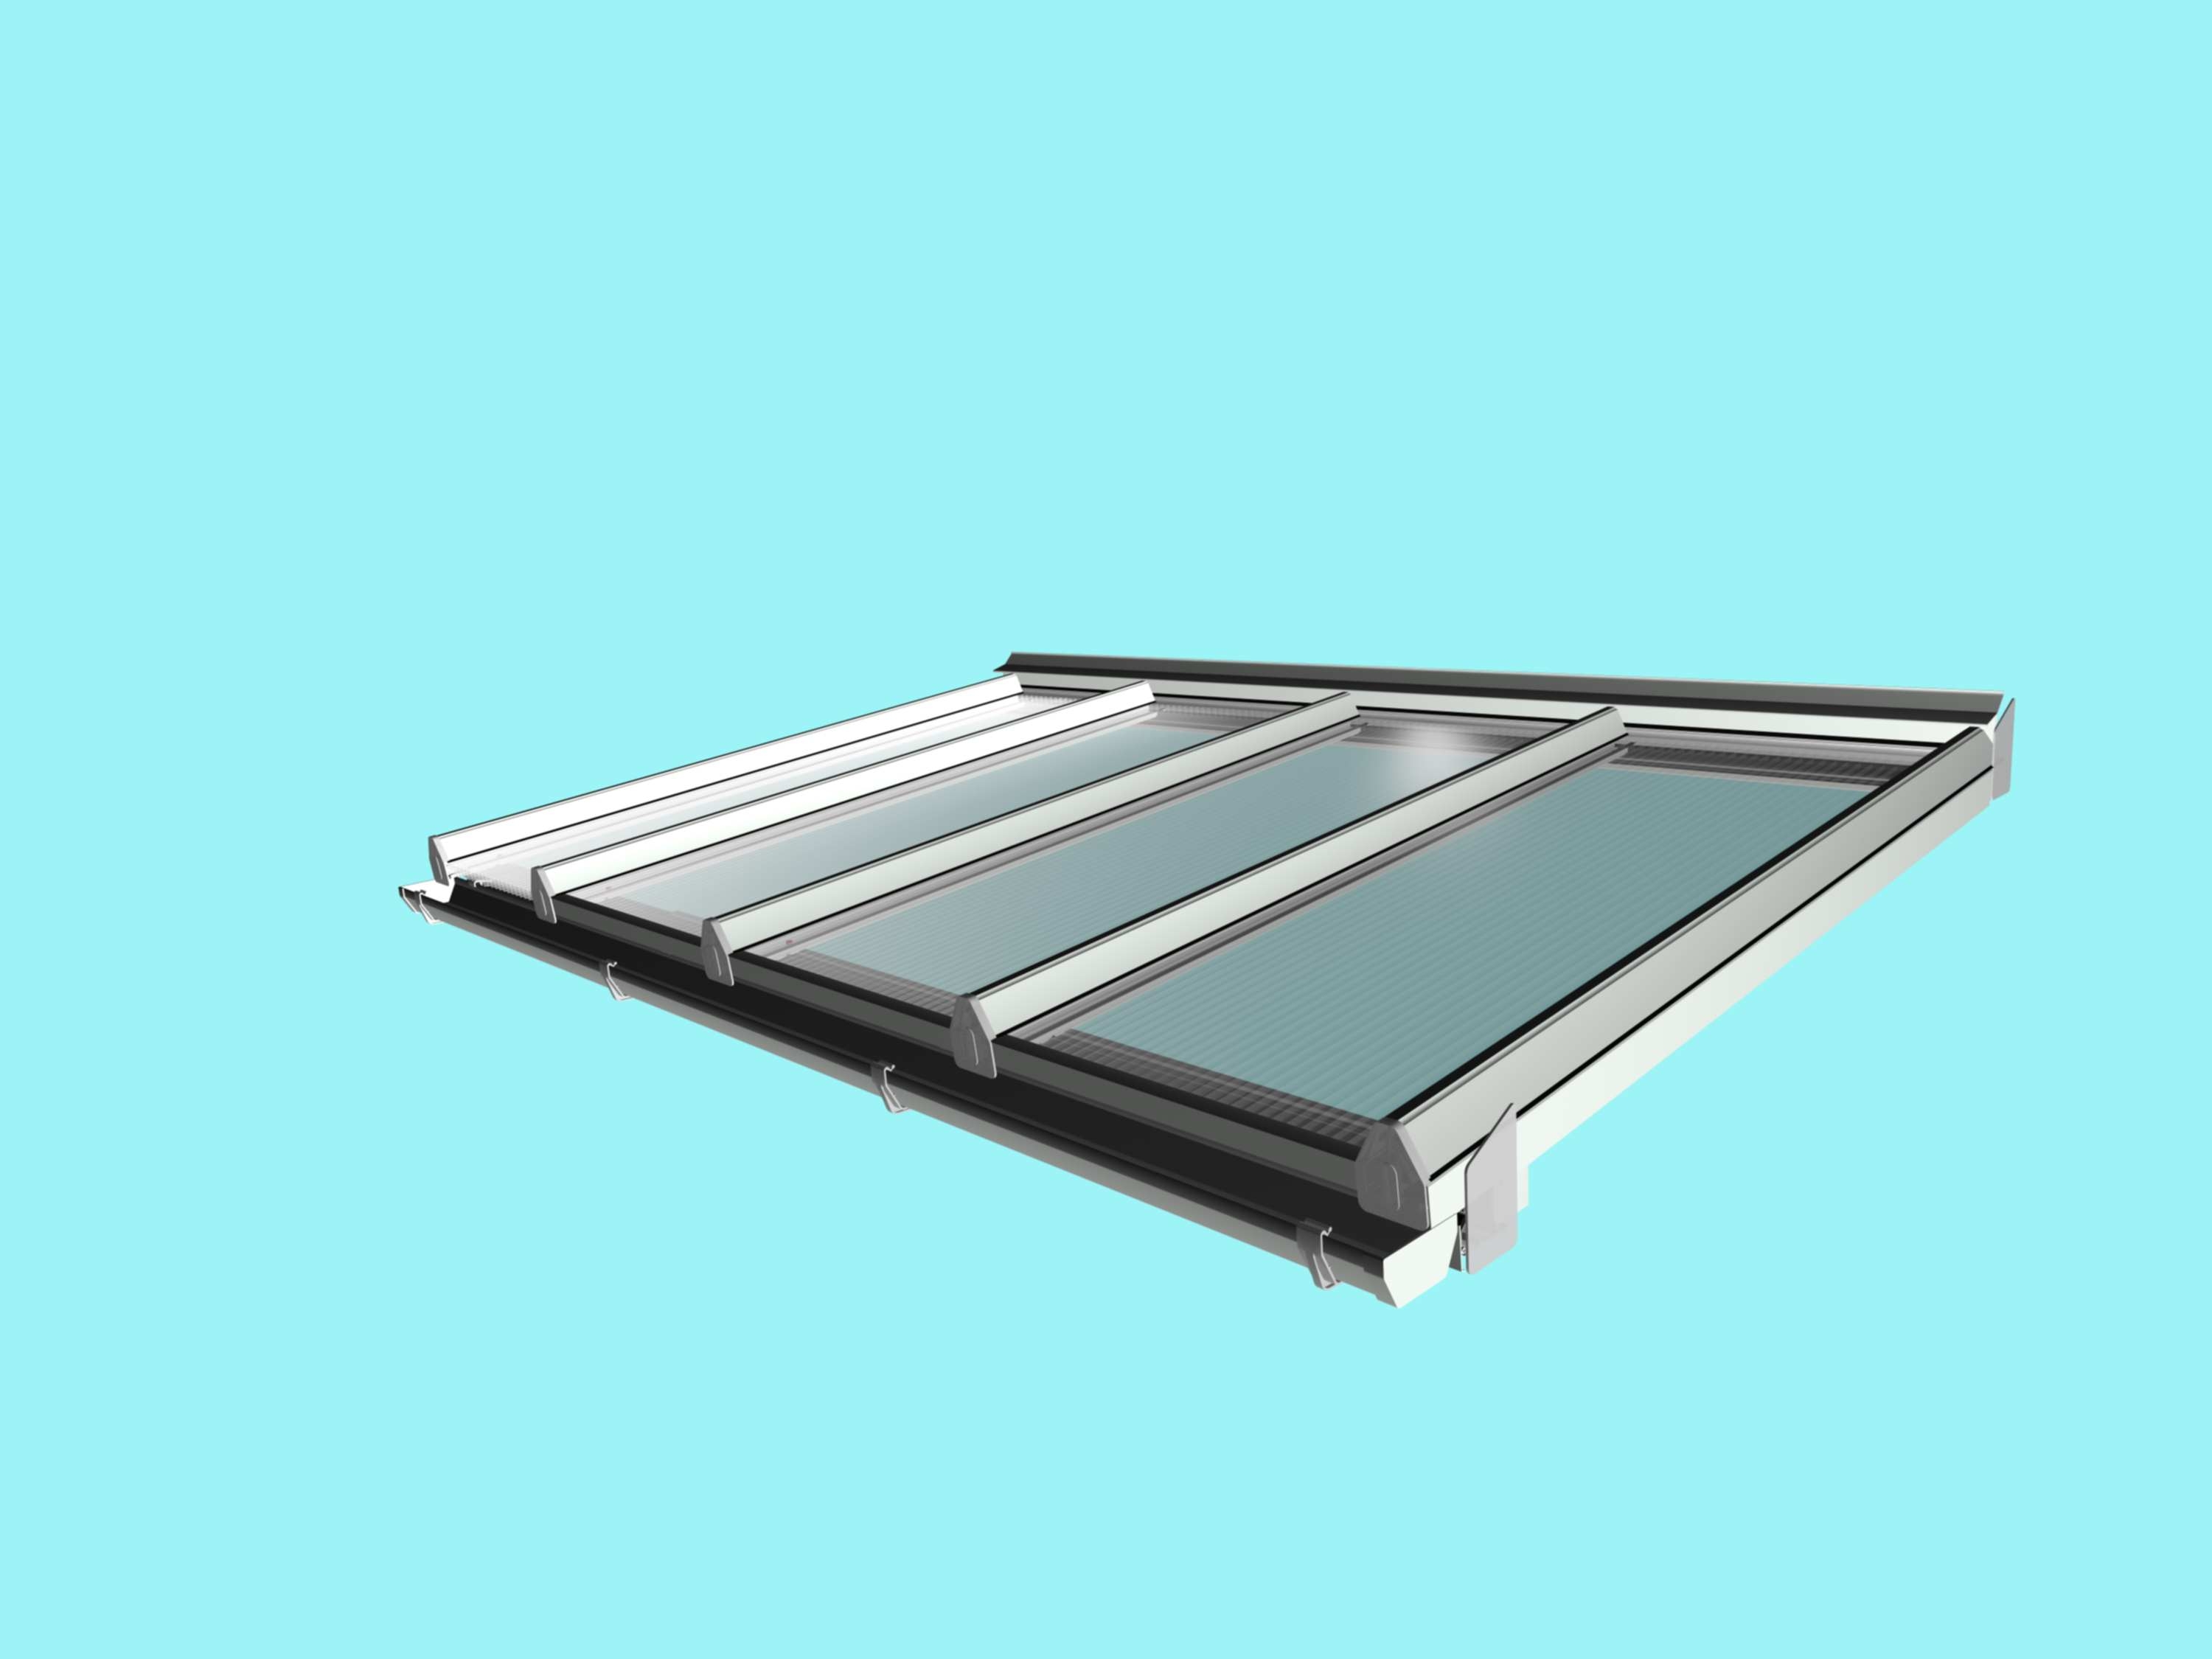 Self-Supporting DIY Conservatory Roof Kit for 16mm polycarbonate, 4.0m wide x 2.5m Projection from Omega Build